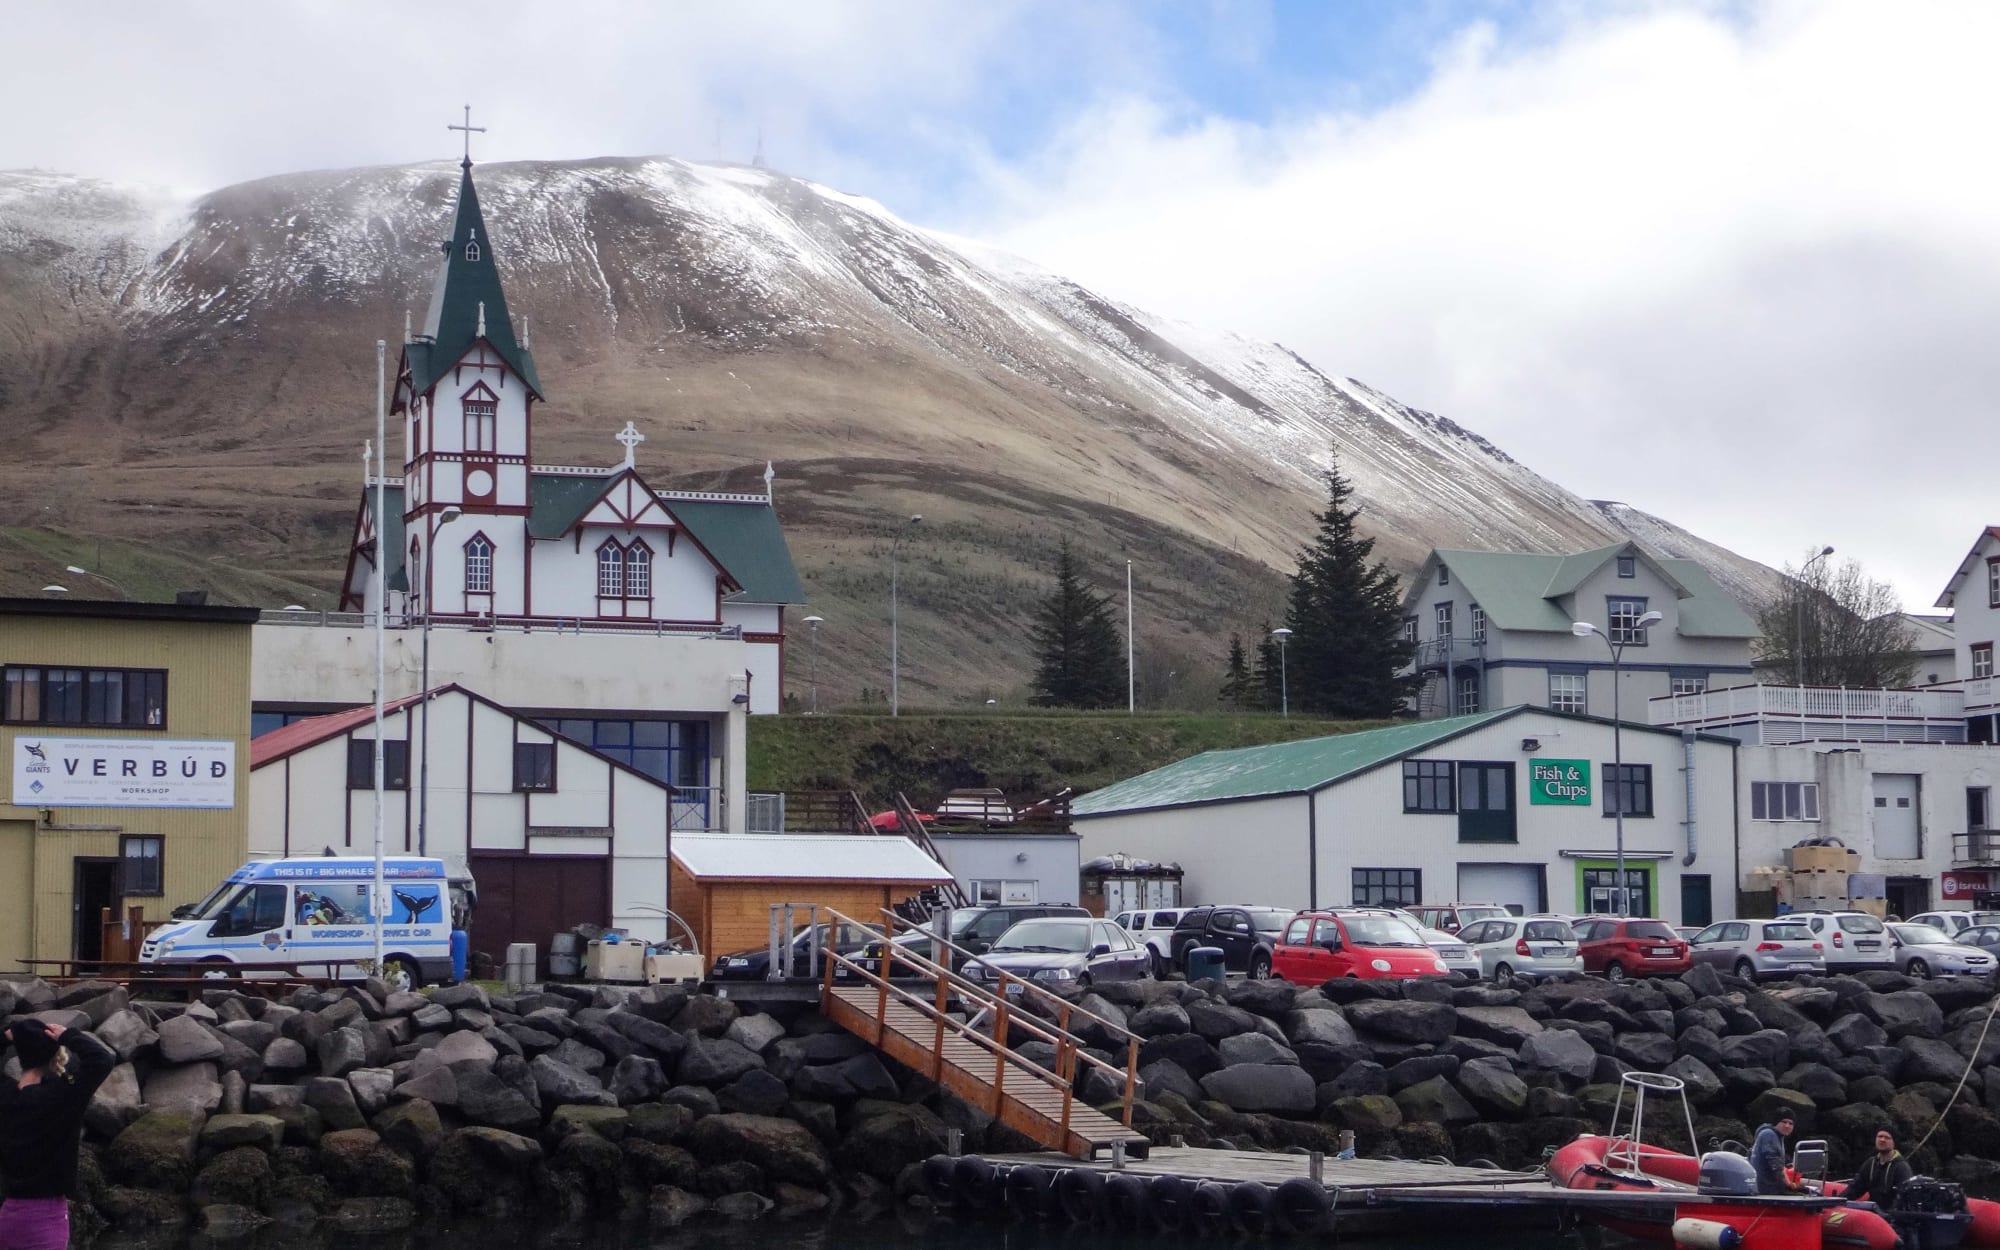 Icelandic town with church and hill dusted with snow.